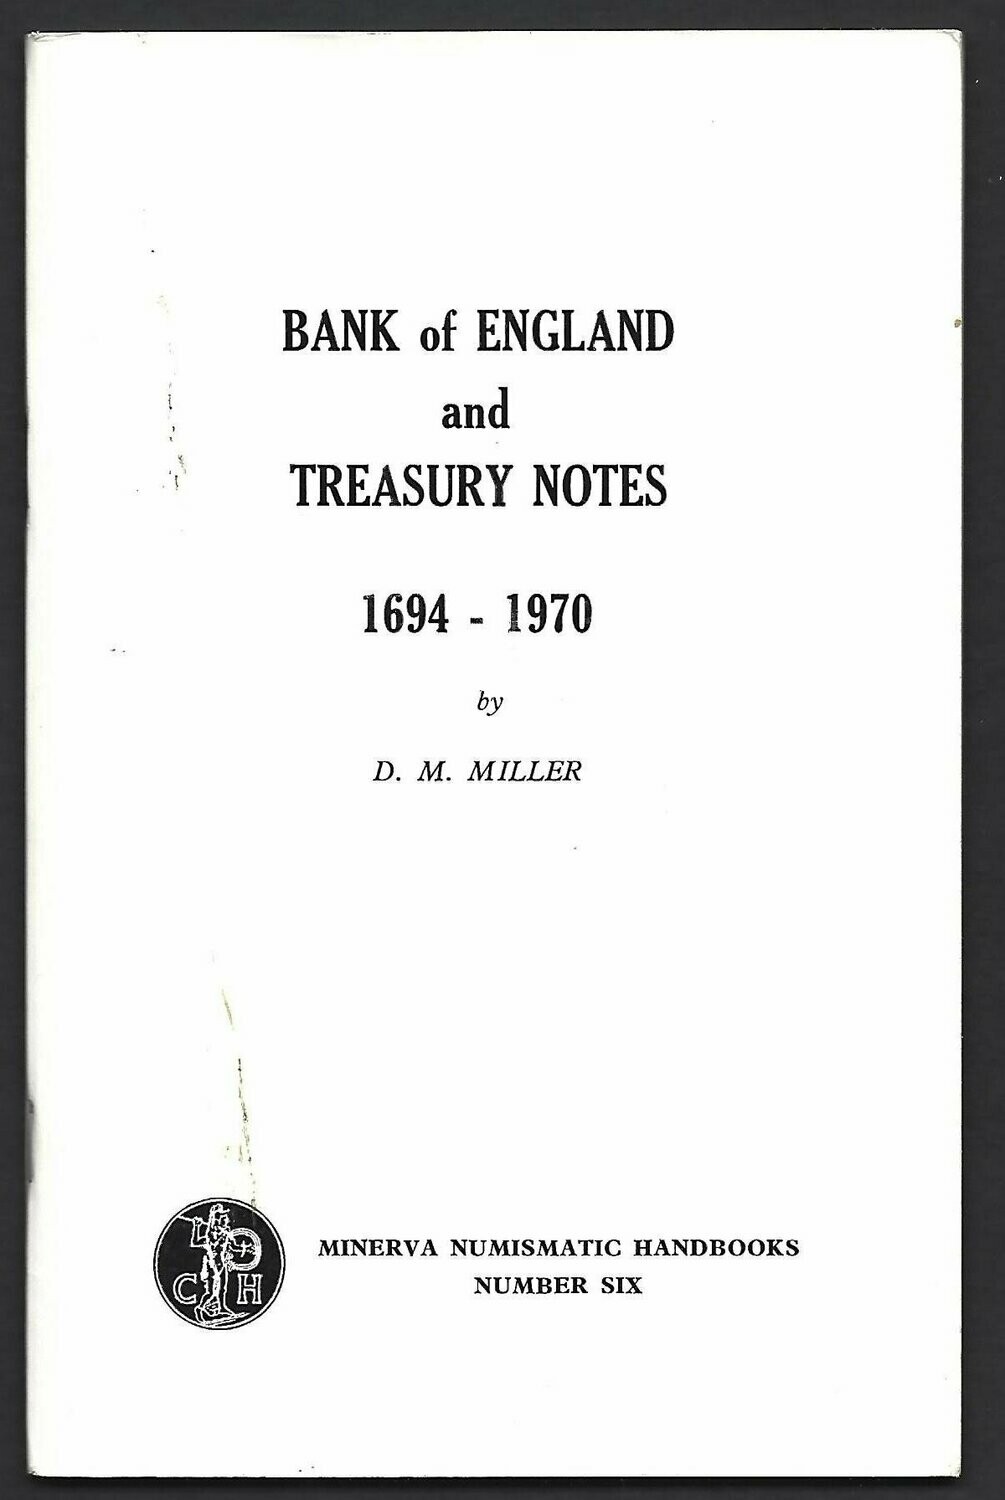 British; D.M. Miller, "Bank of England and Treasury Notes, 1694-1970."